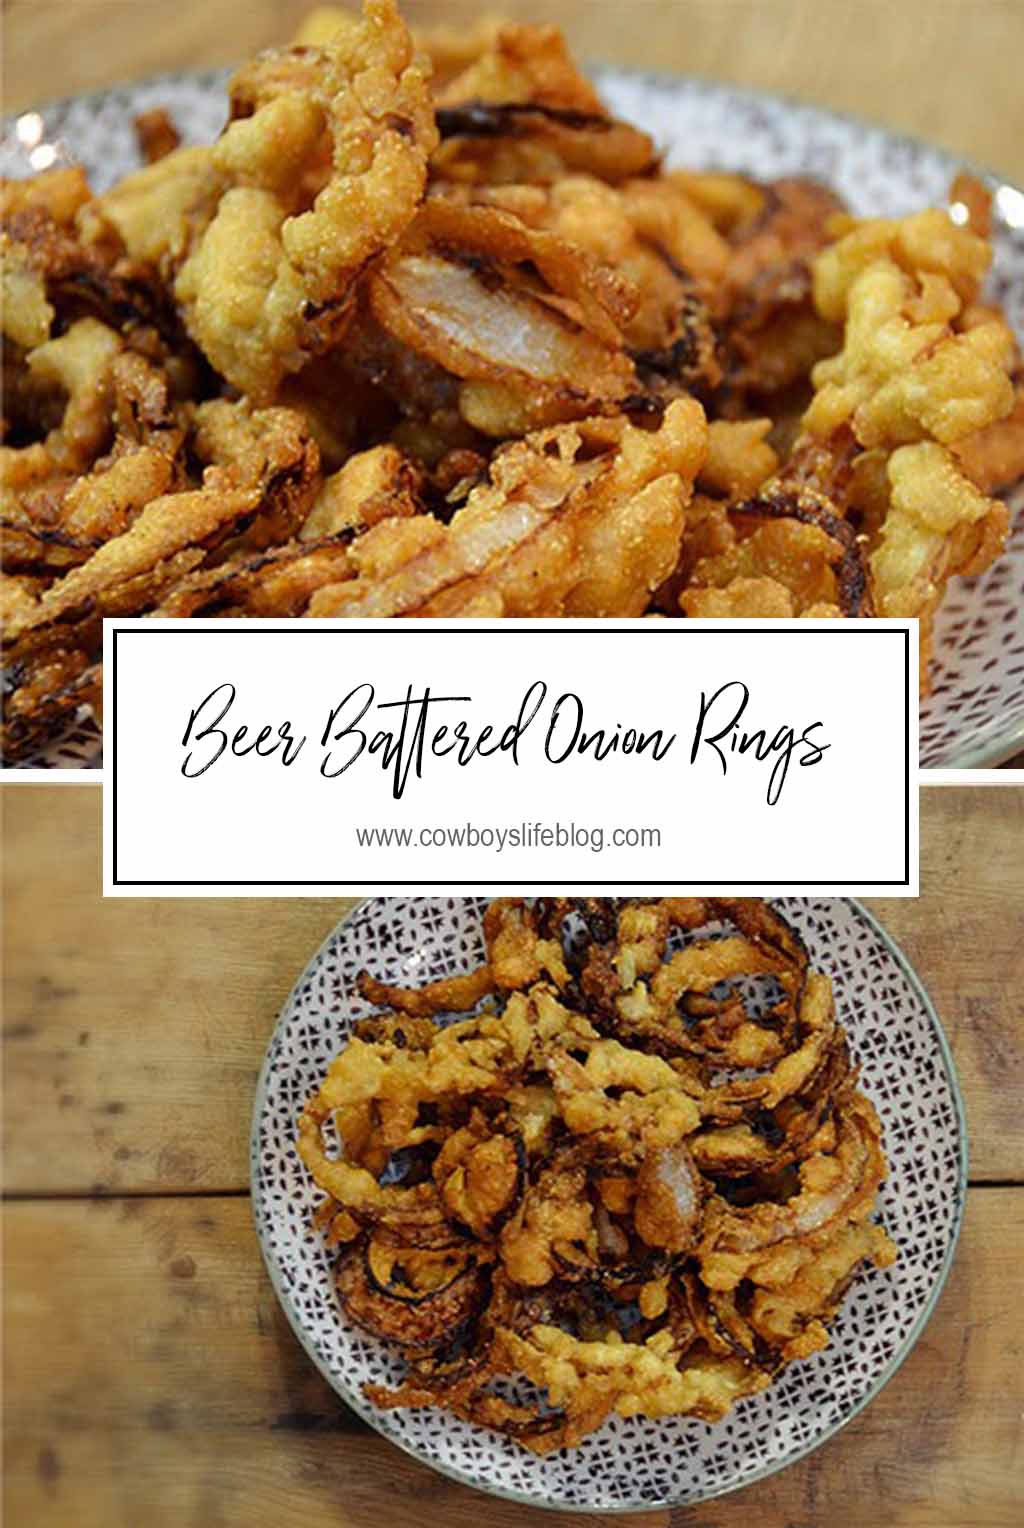 BEER BATTERED ONION RINGS RECIPE